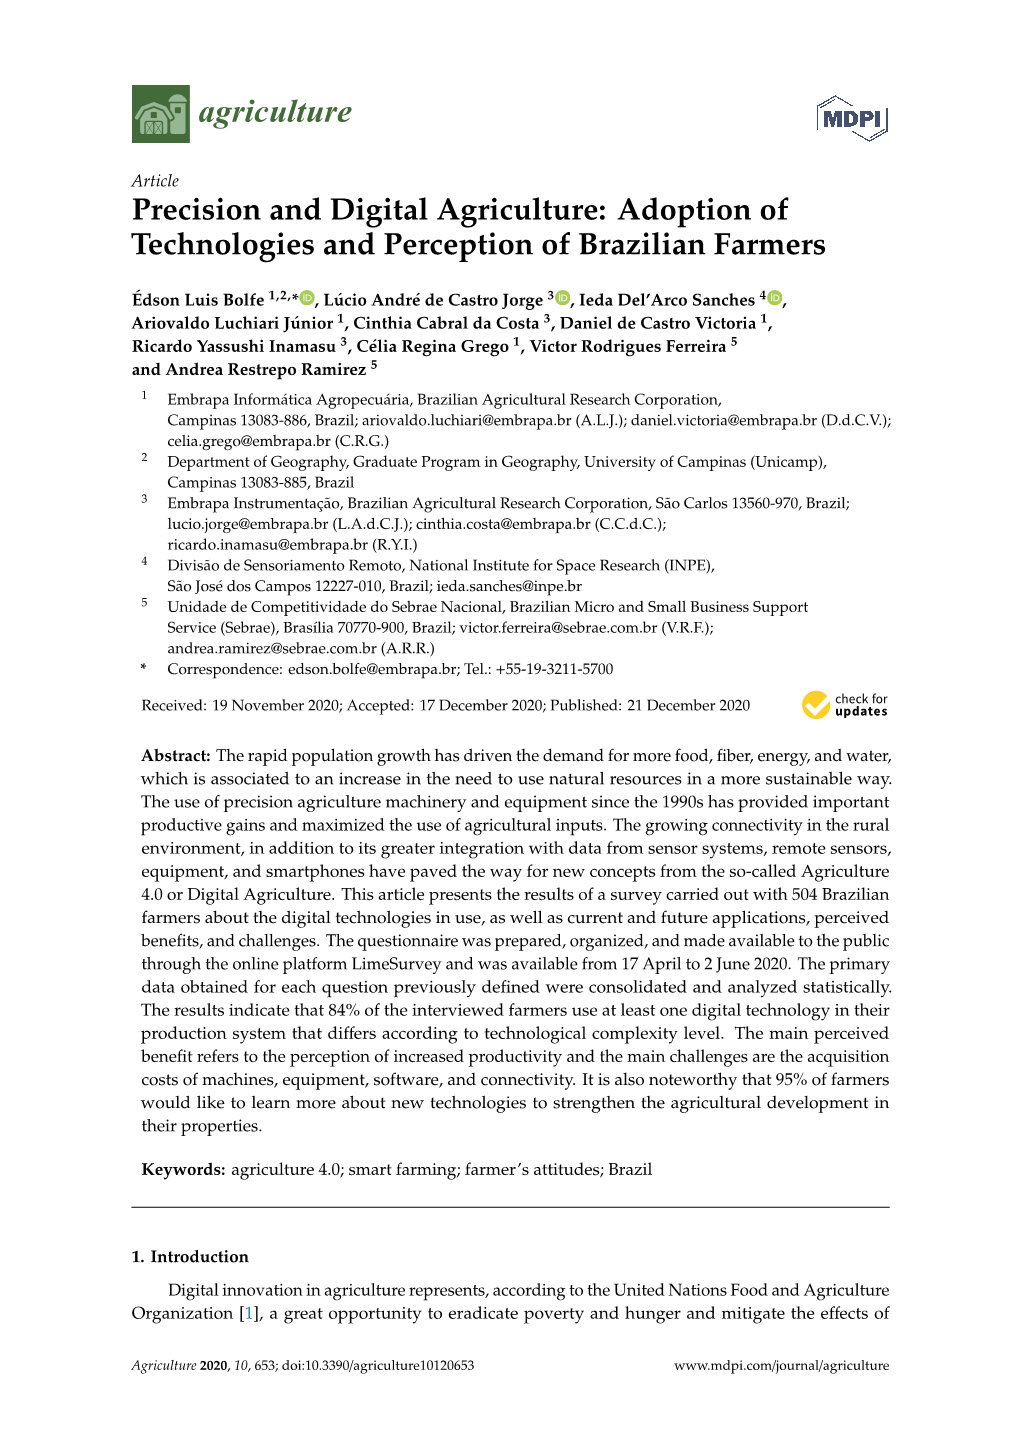 Precision and Digital Agriculture: Adoption of Technologies and Perception of Brazilian Farmers